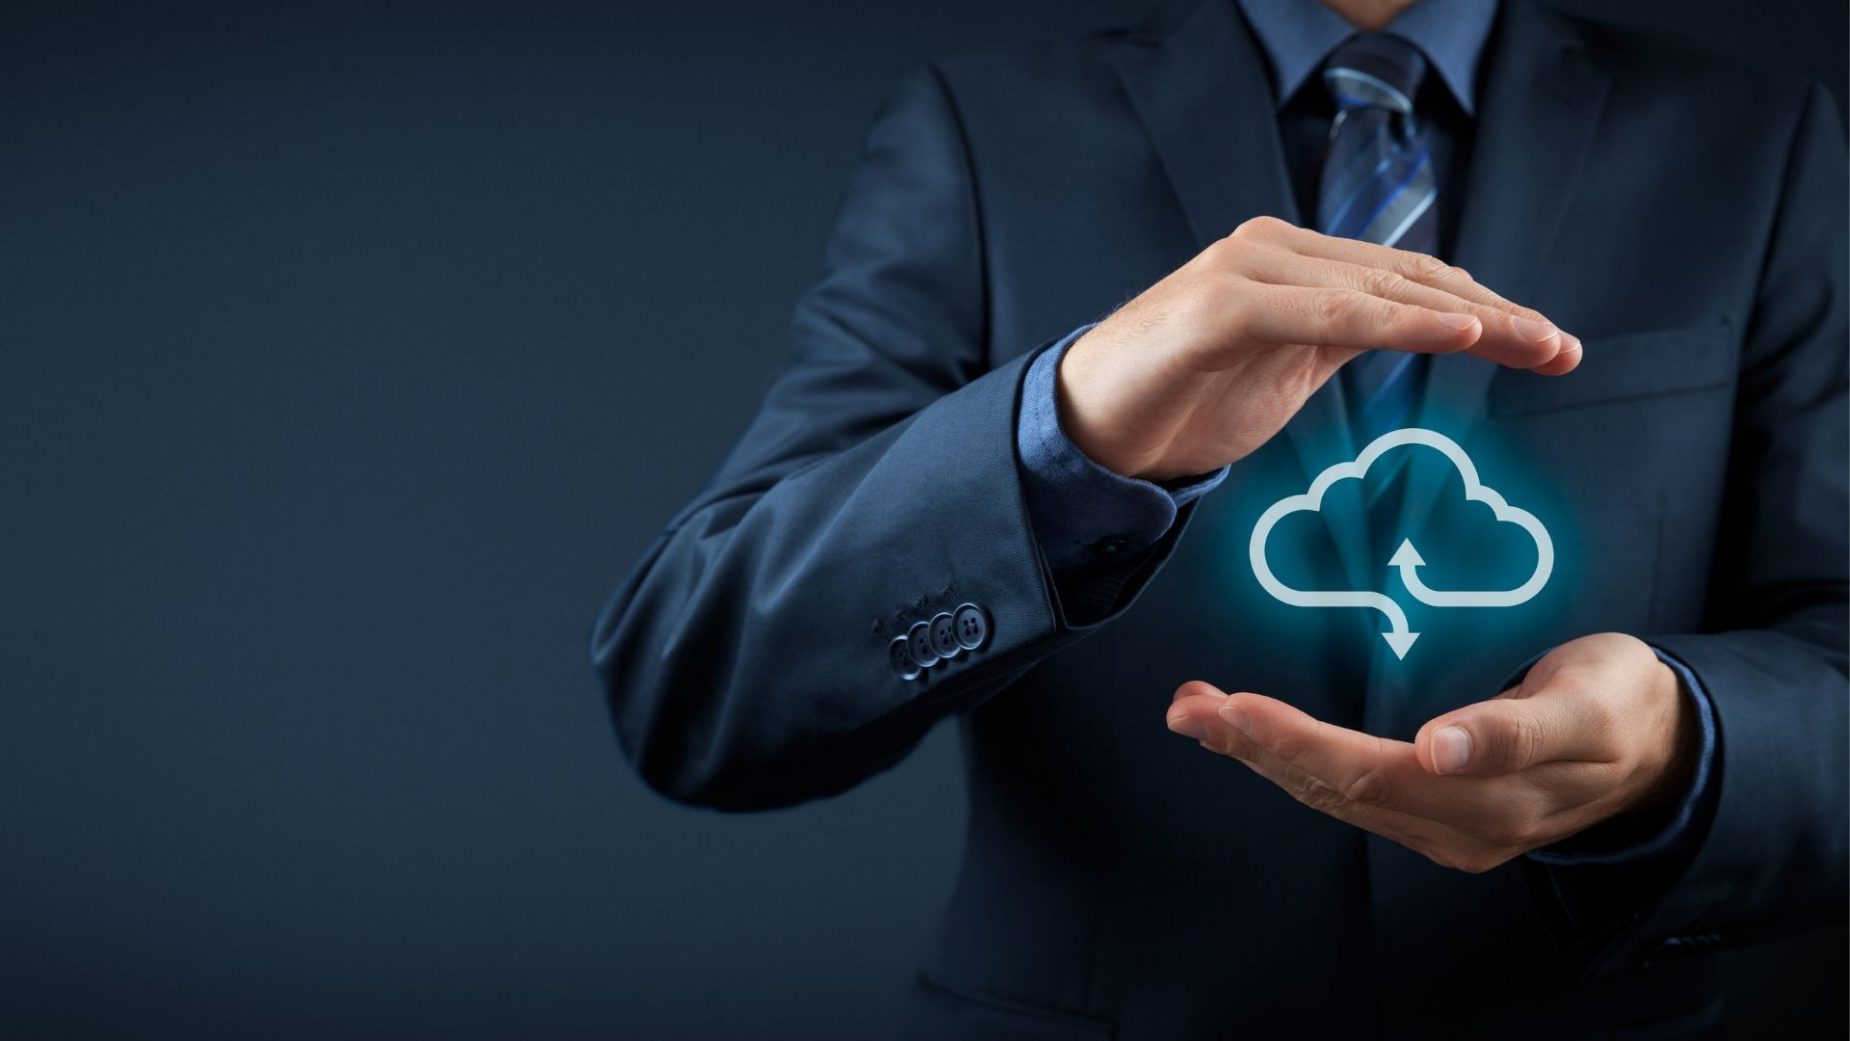 Global Cloud Services Market Overview And Prospects